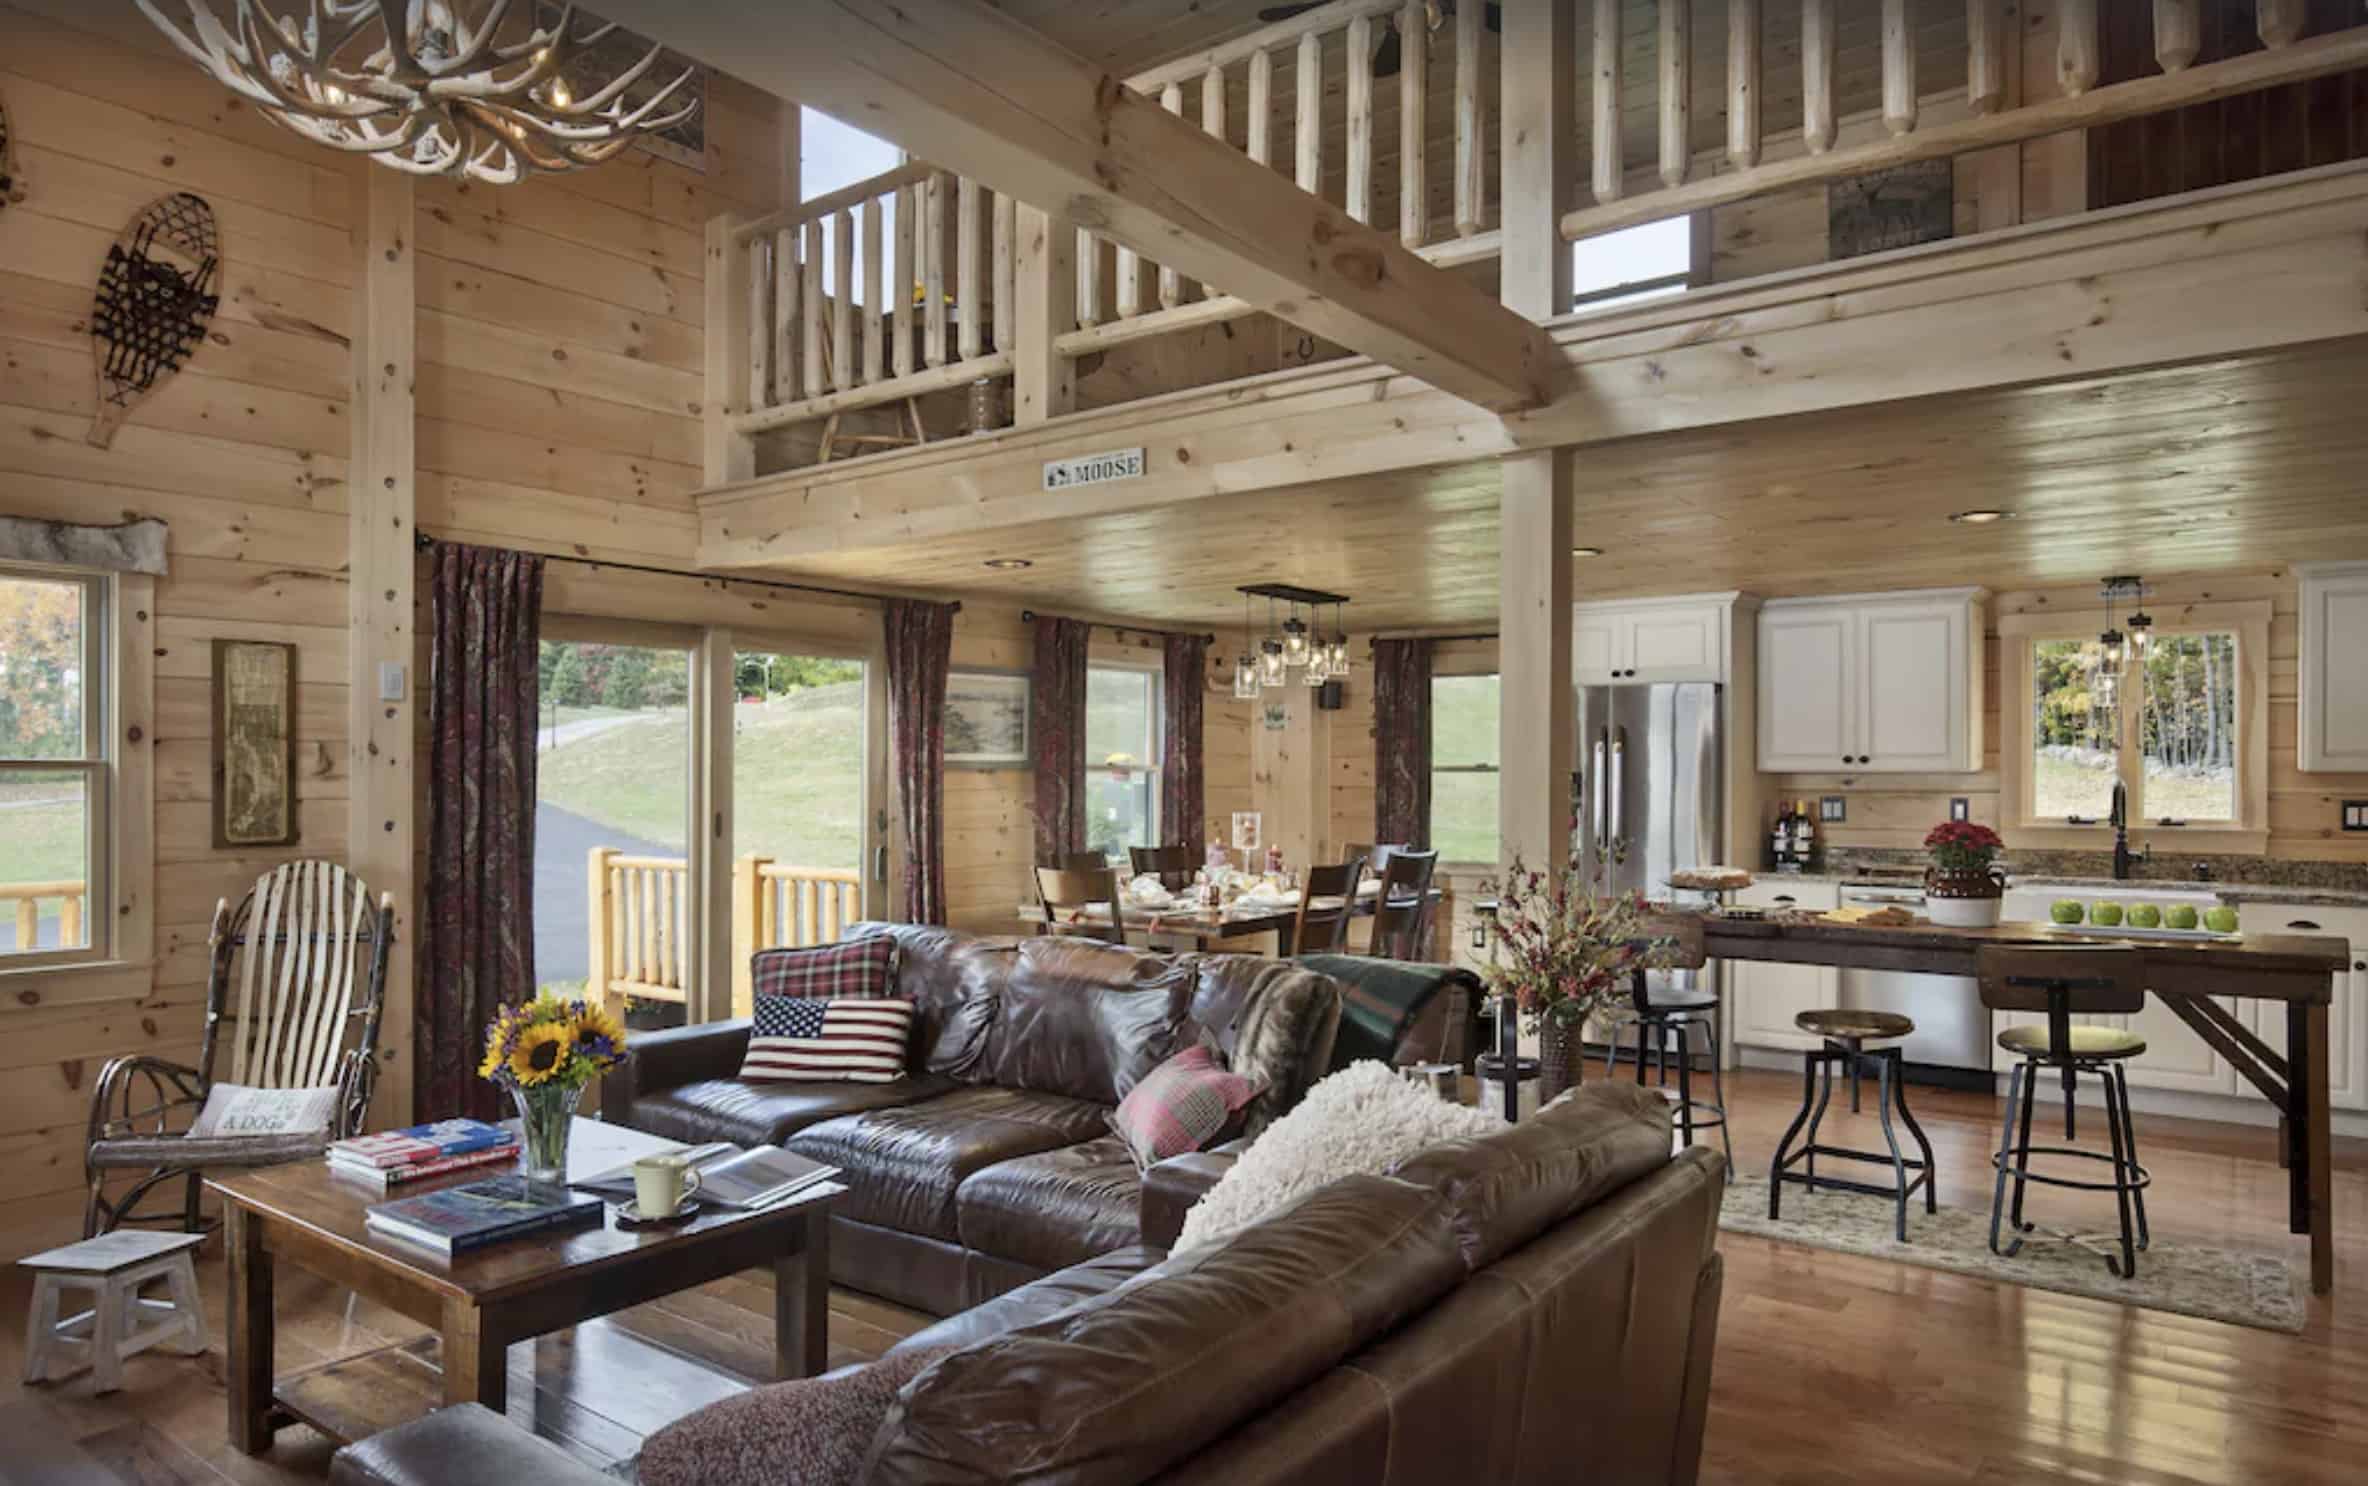 Living room inside of a wooden cabin with a leather couch and high, vaulted ceilings.